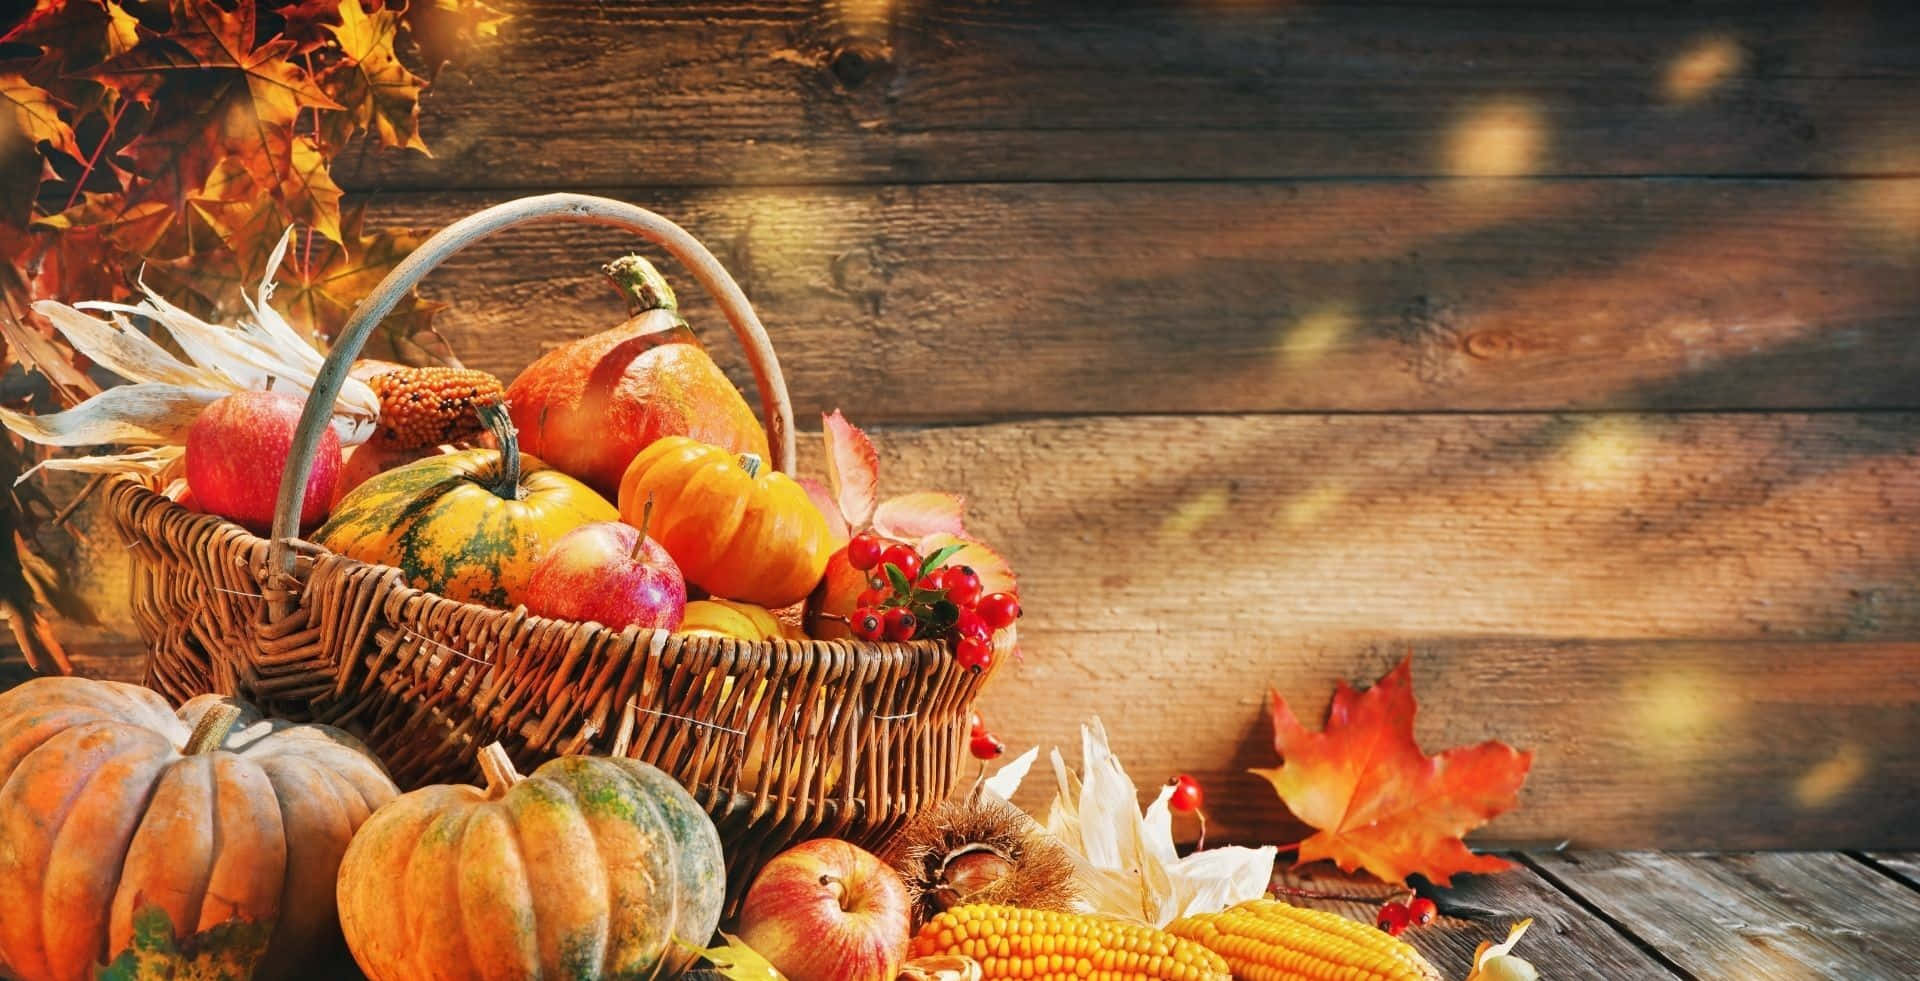 Download A Basket Of Pumpkins And Fall Leaves On A Wooden Table ...